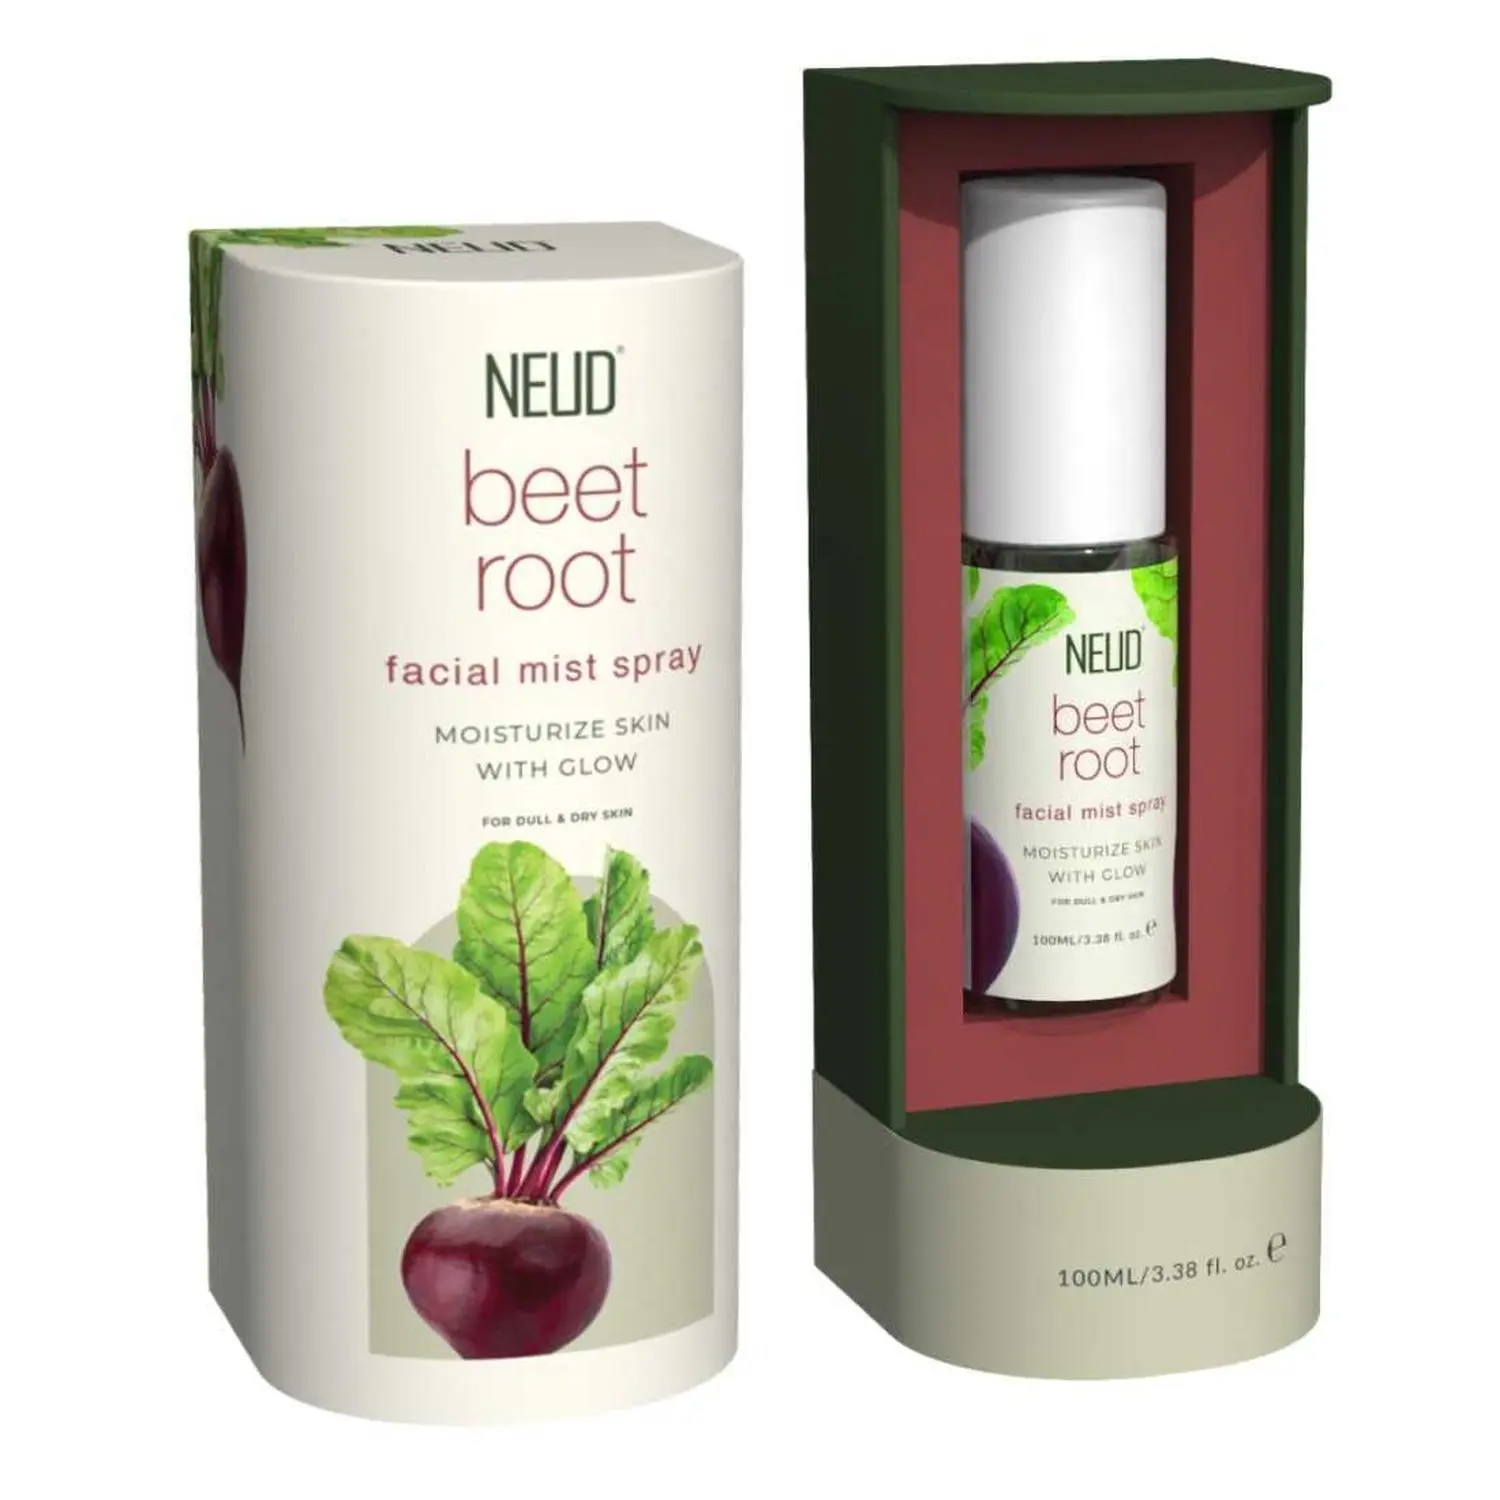 NEUD Beet Root Facial Mist Spray for Glowing and Moisturized Skin - 1 Pack (100 ml)